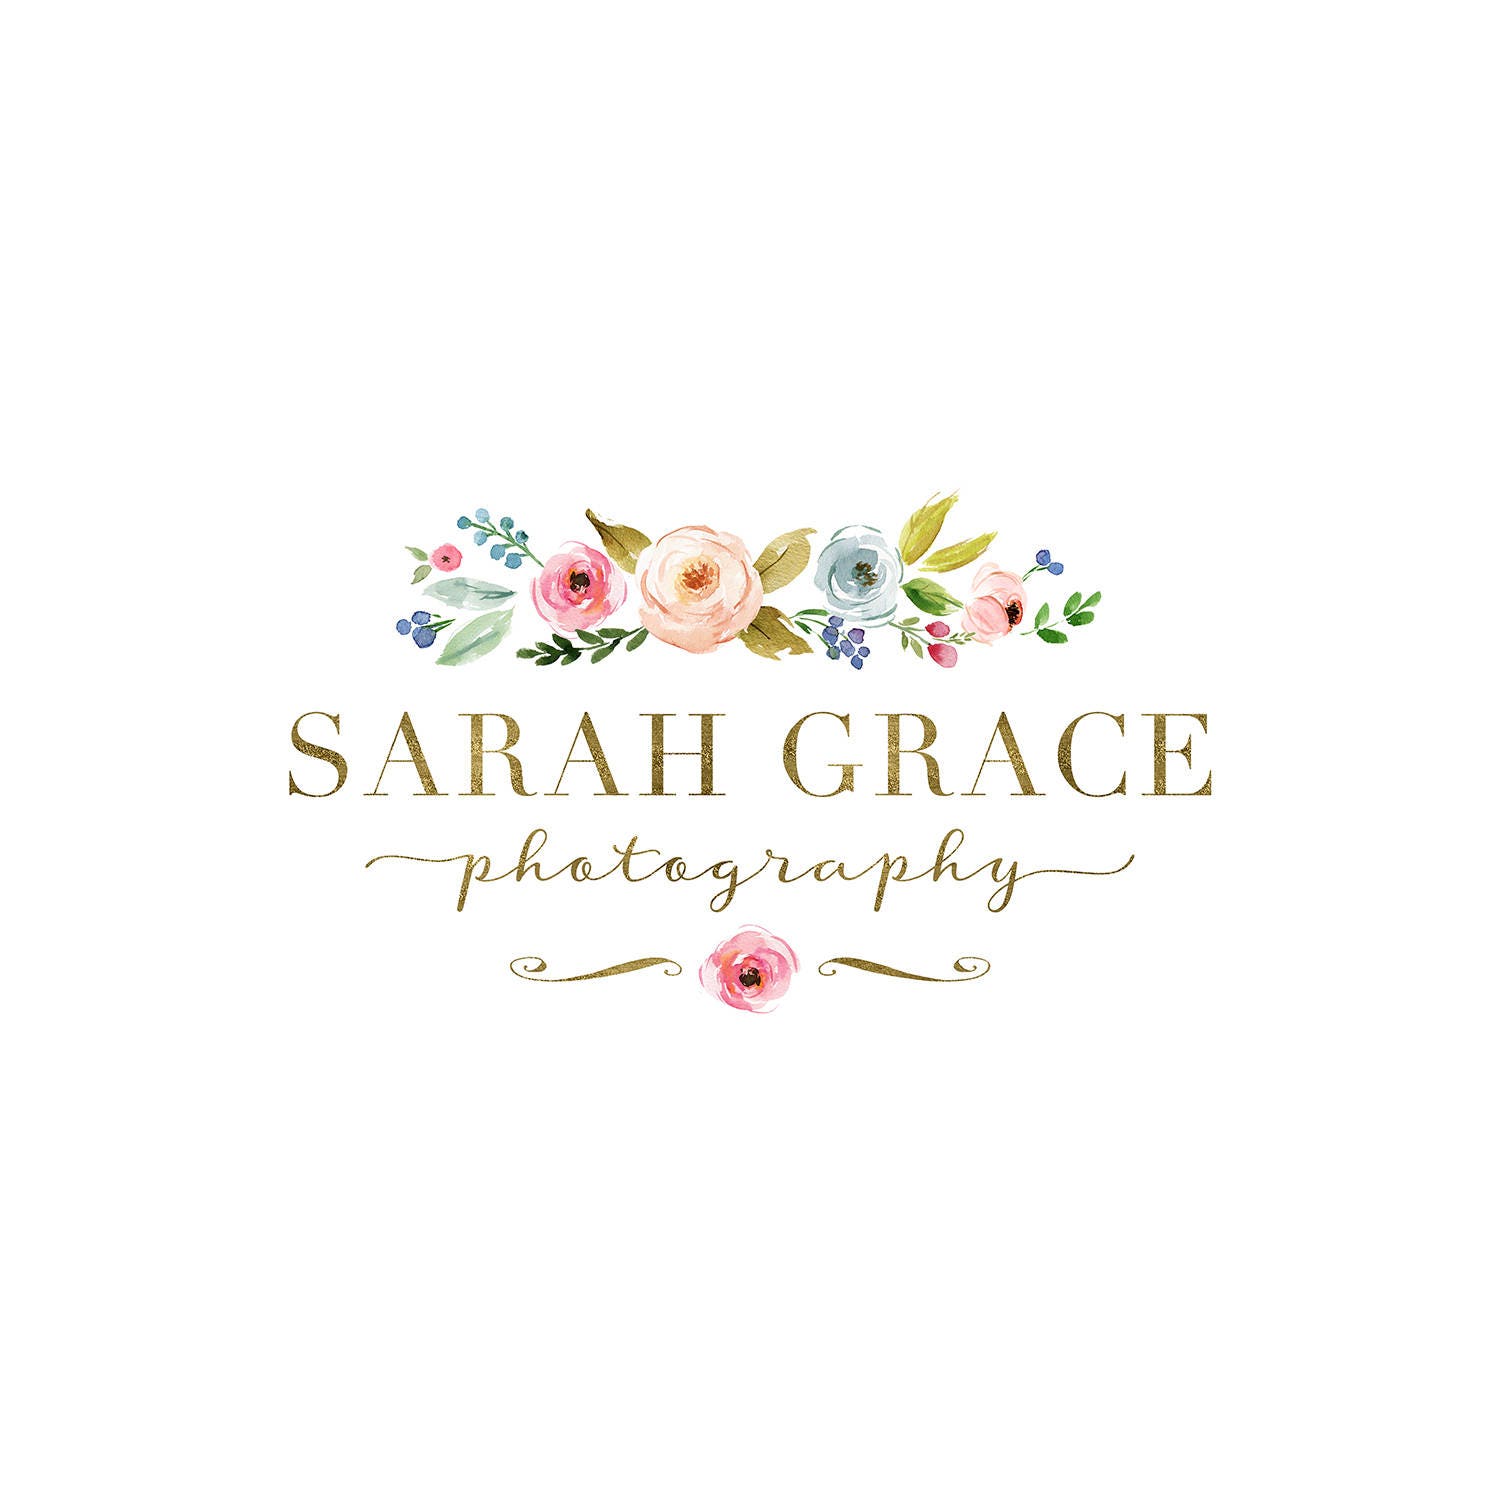 Premade Photography Logo and Watermark Watercolor Gold | Etsy